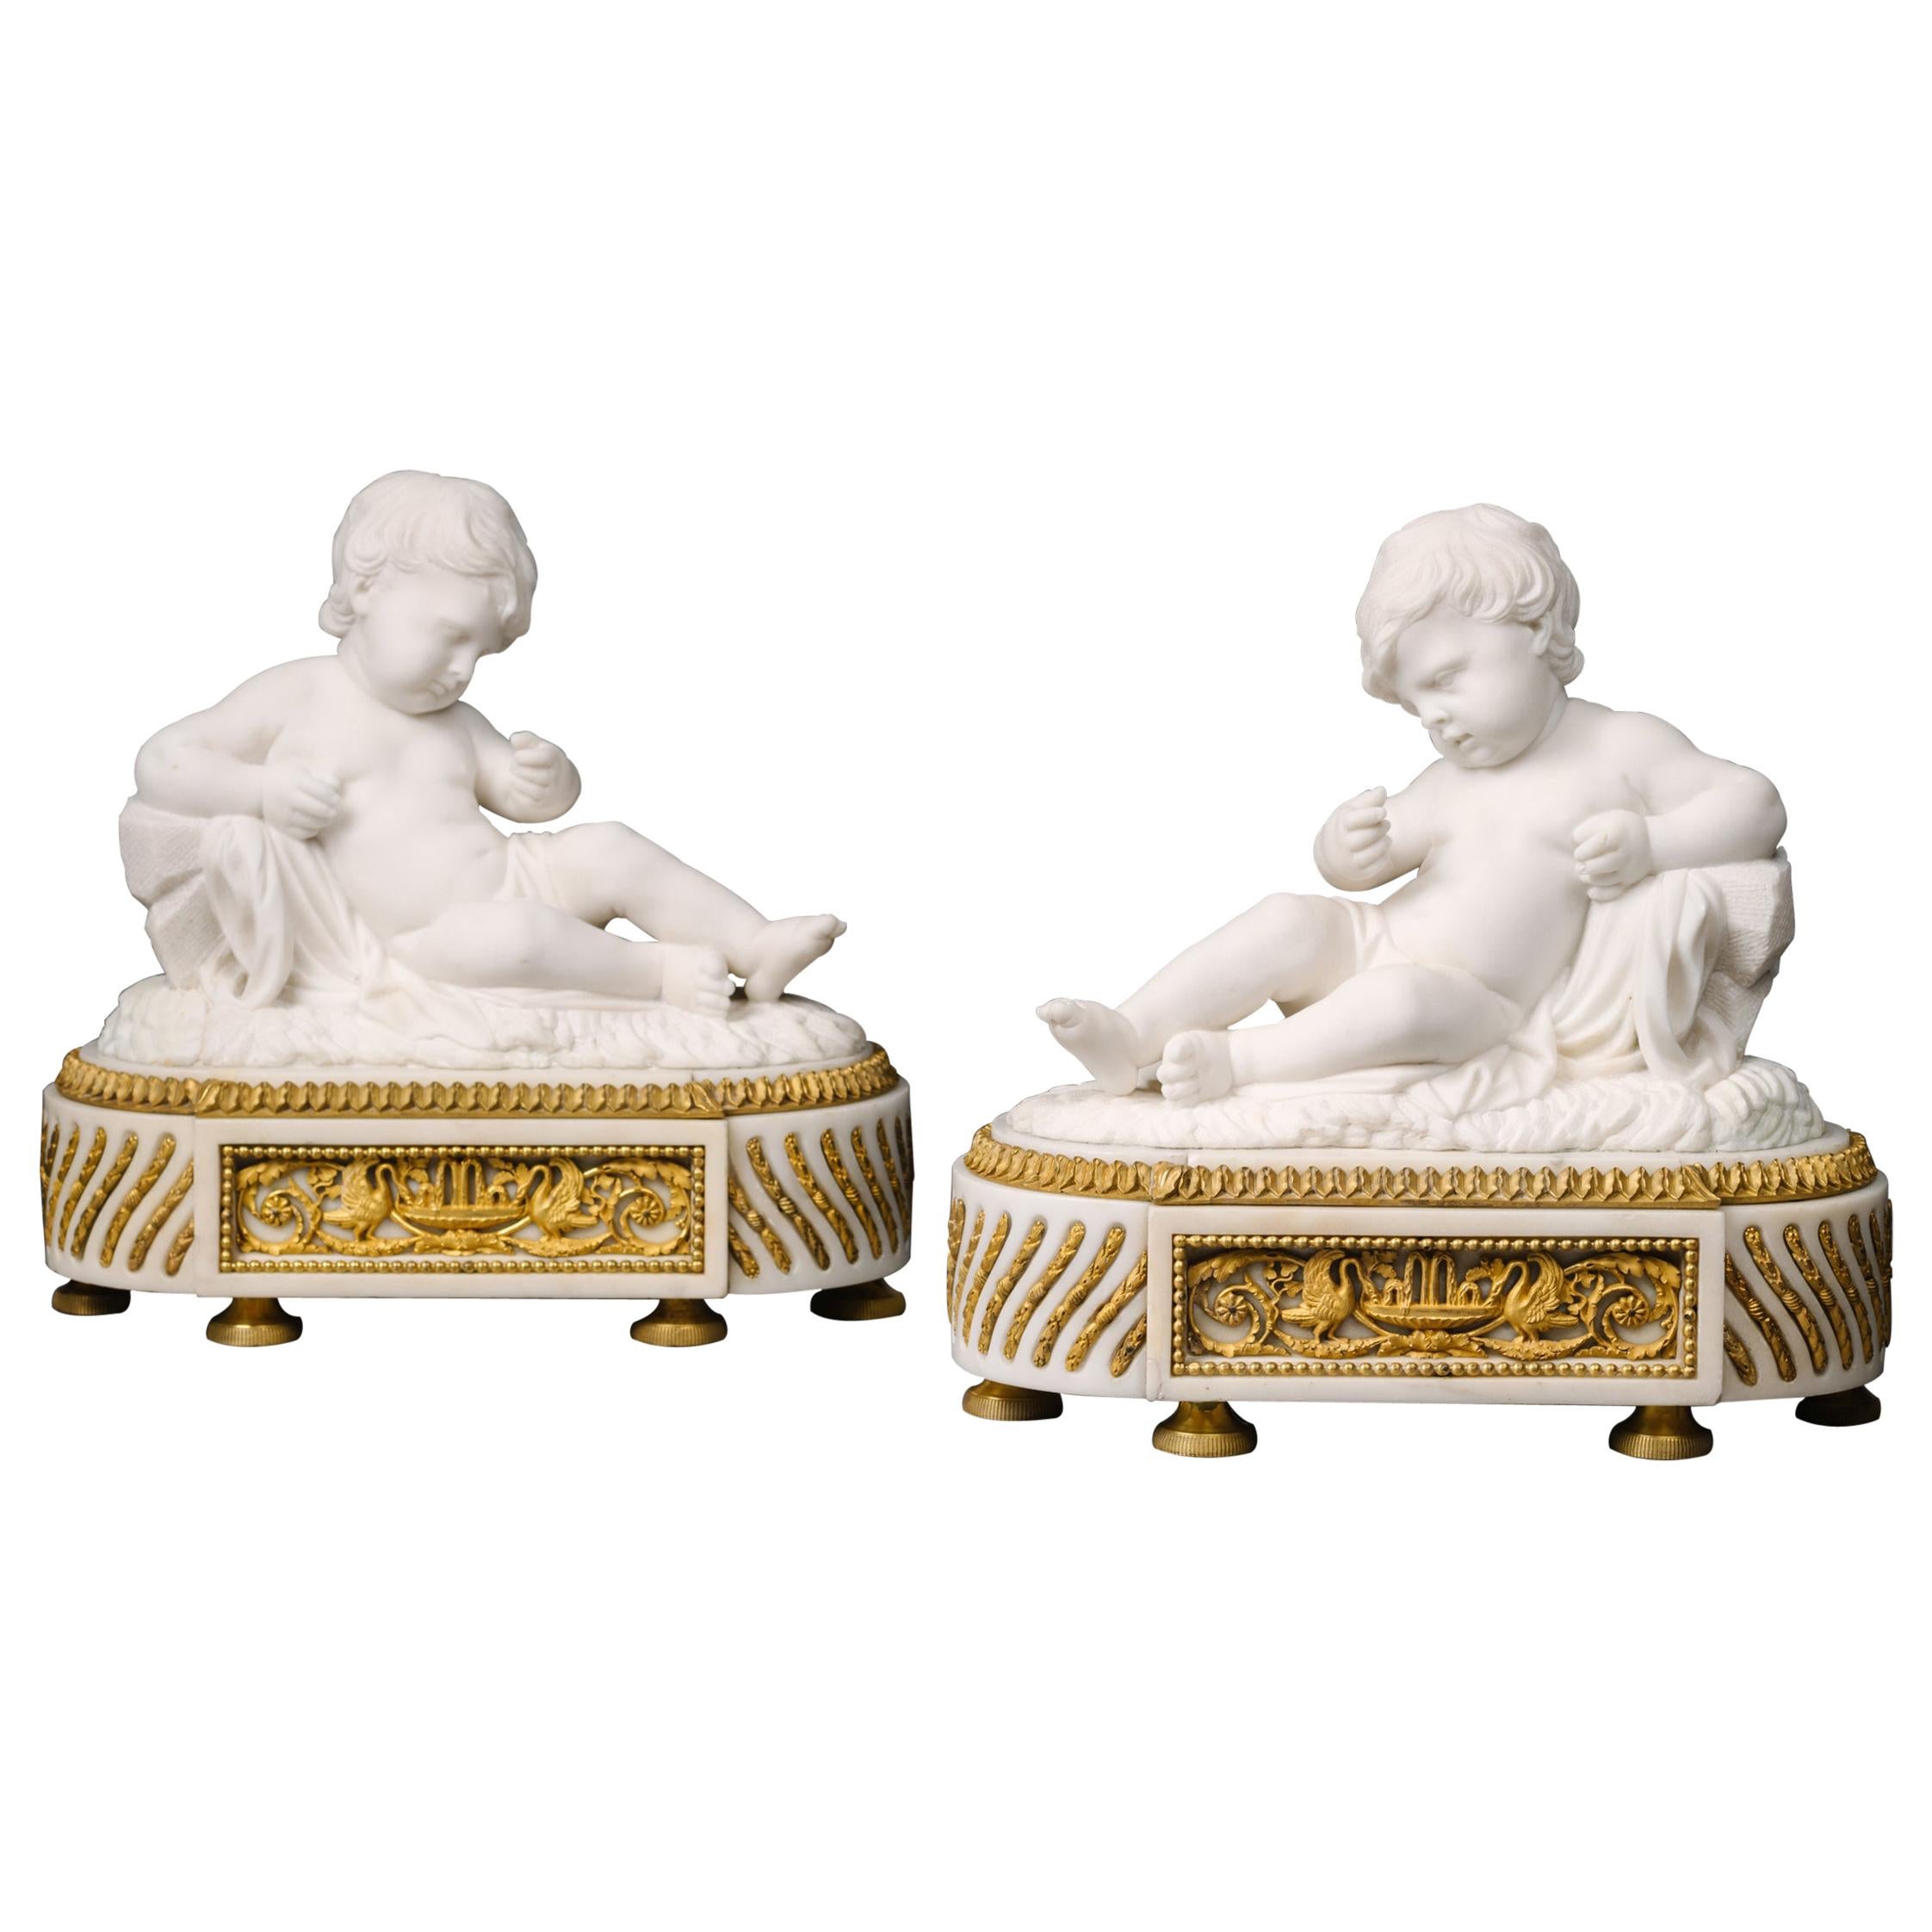 Pair of White Marble Sculptures of Reclining Putti